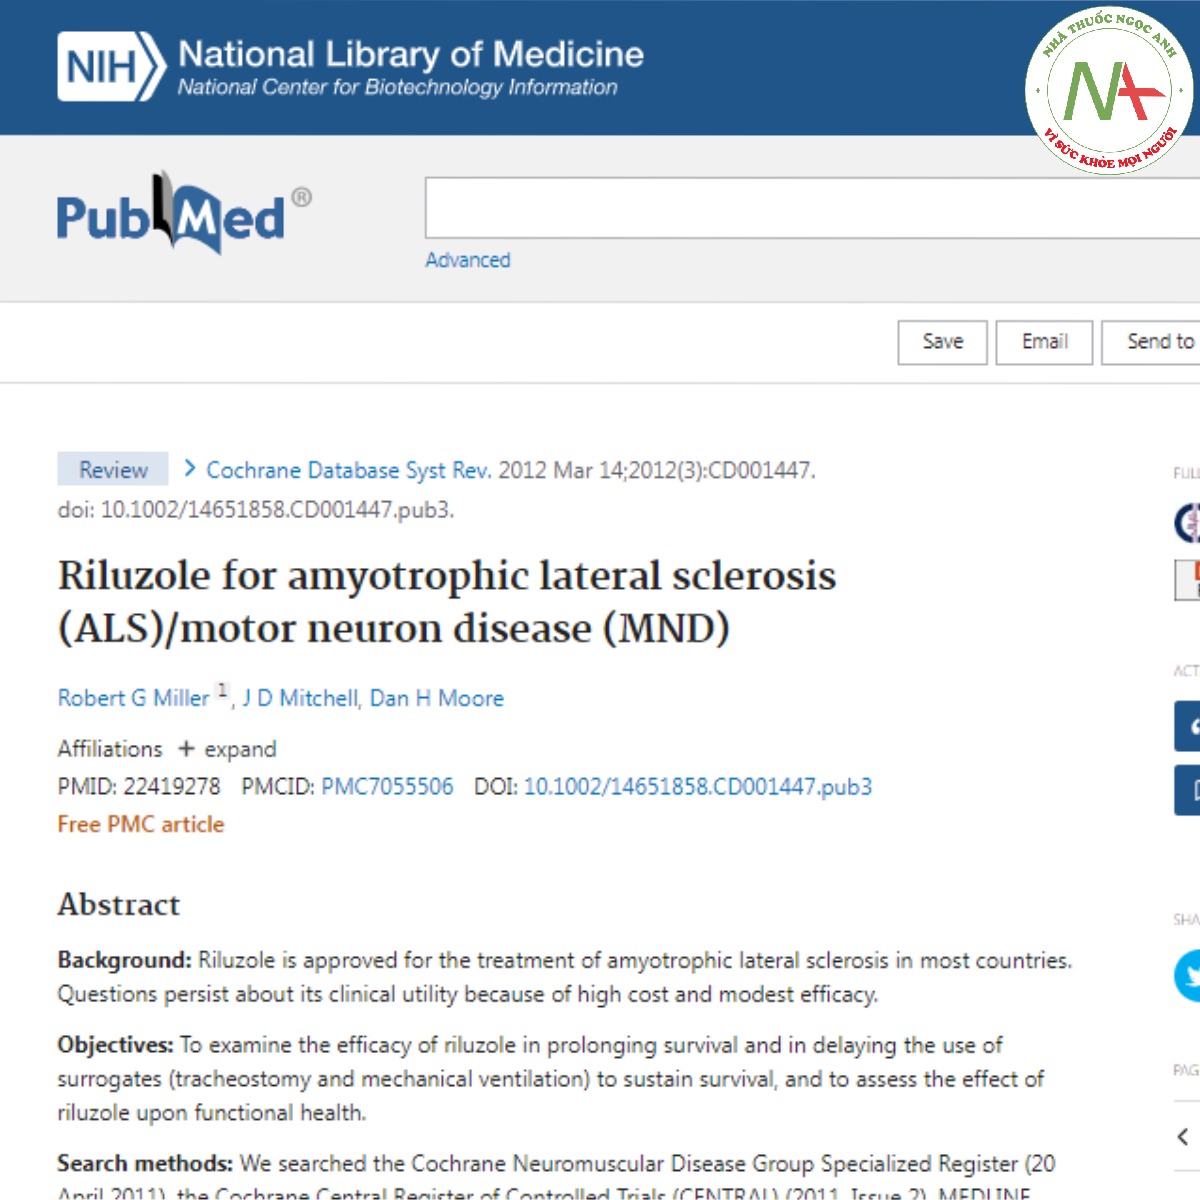 Riluzole for amyotrophic lateral sclerosis (ALS)_motor neuron disease (MND)